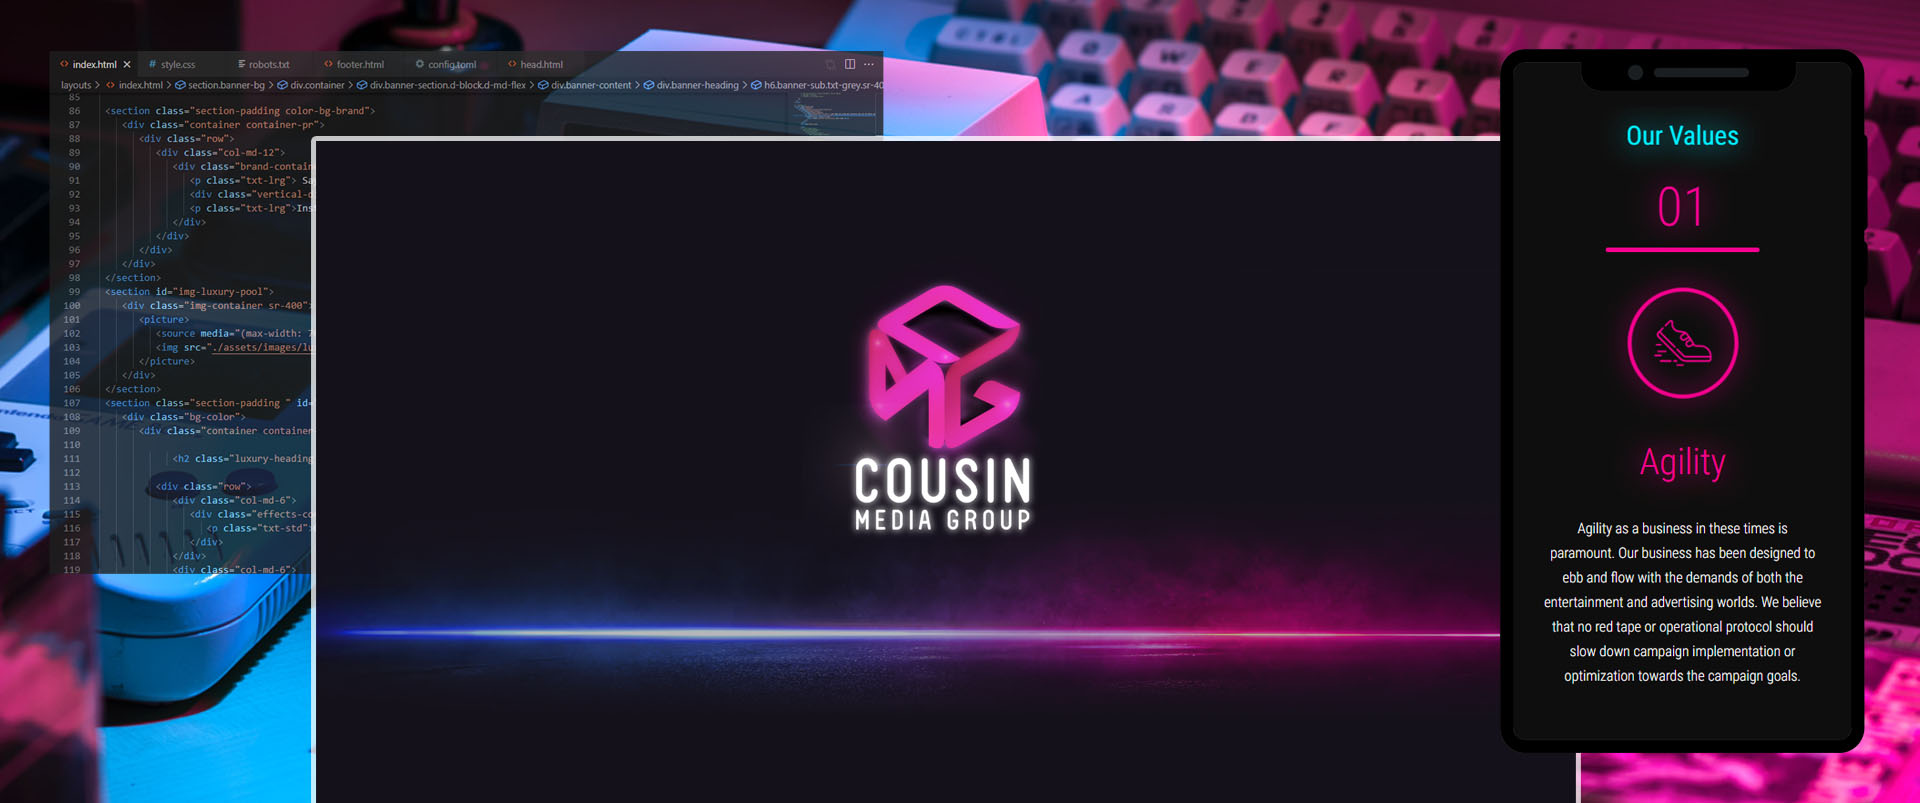 Colony Web Solutions - Cousin MG Work